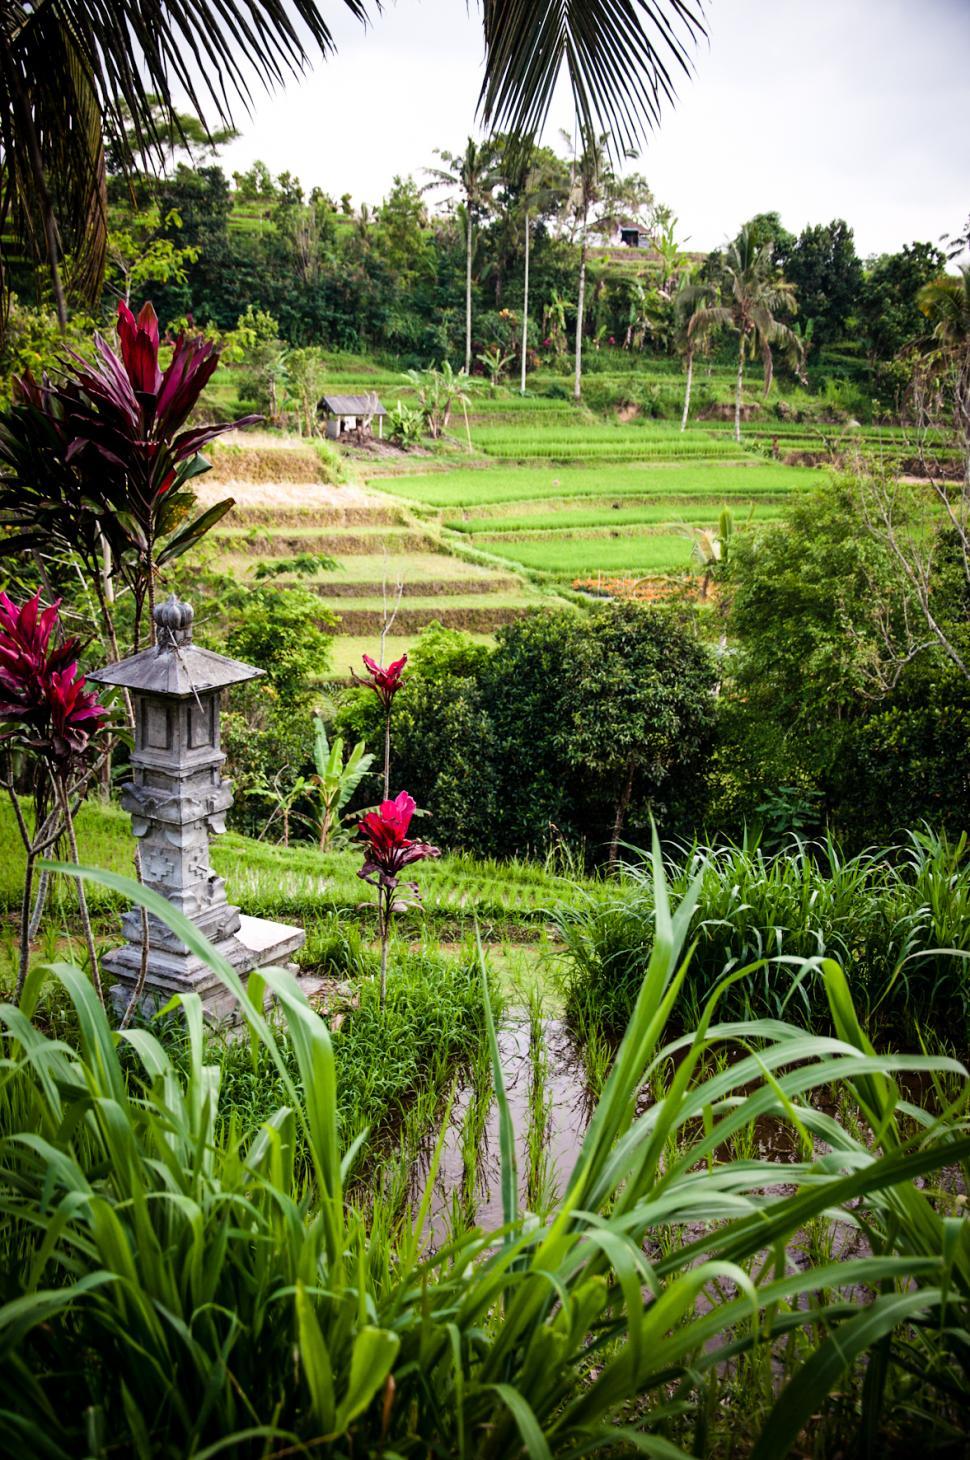 Free Image of Rice Fields in Bali Asia 